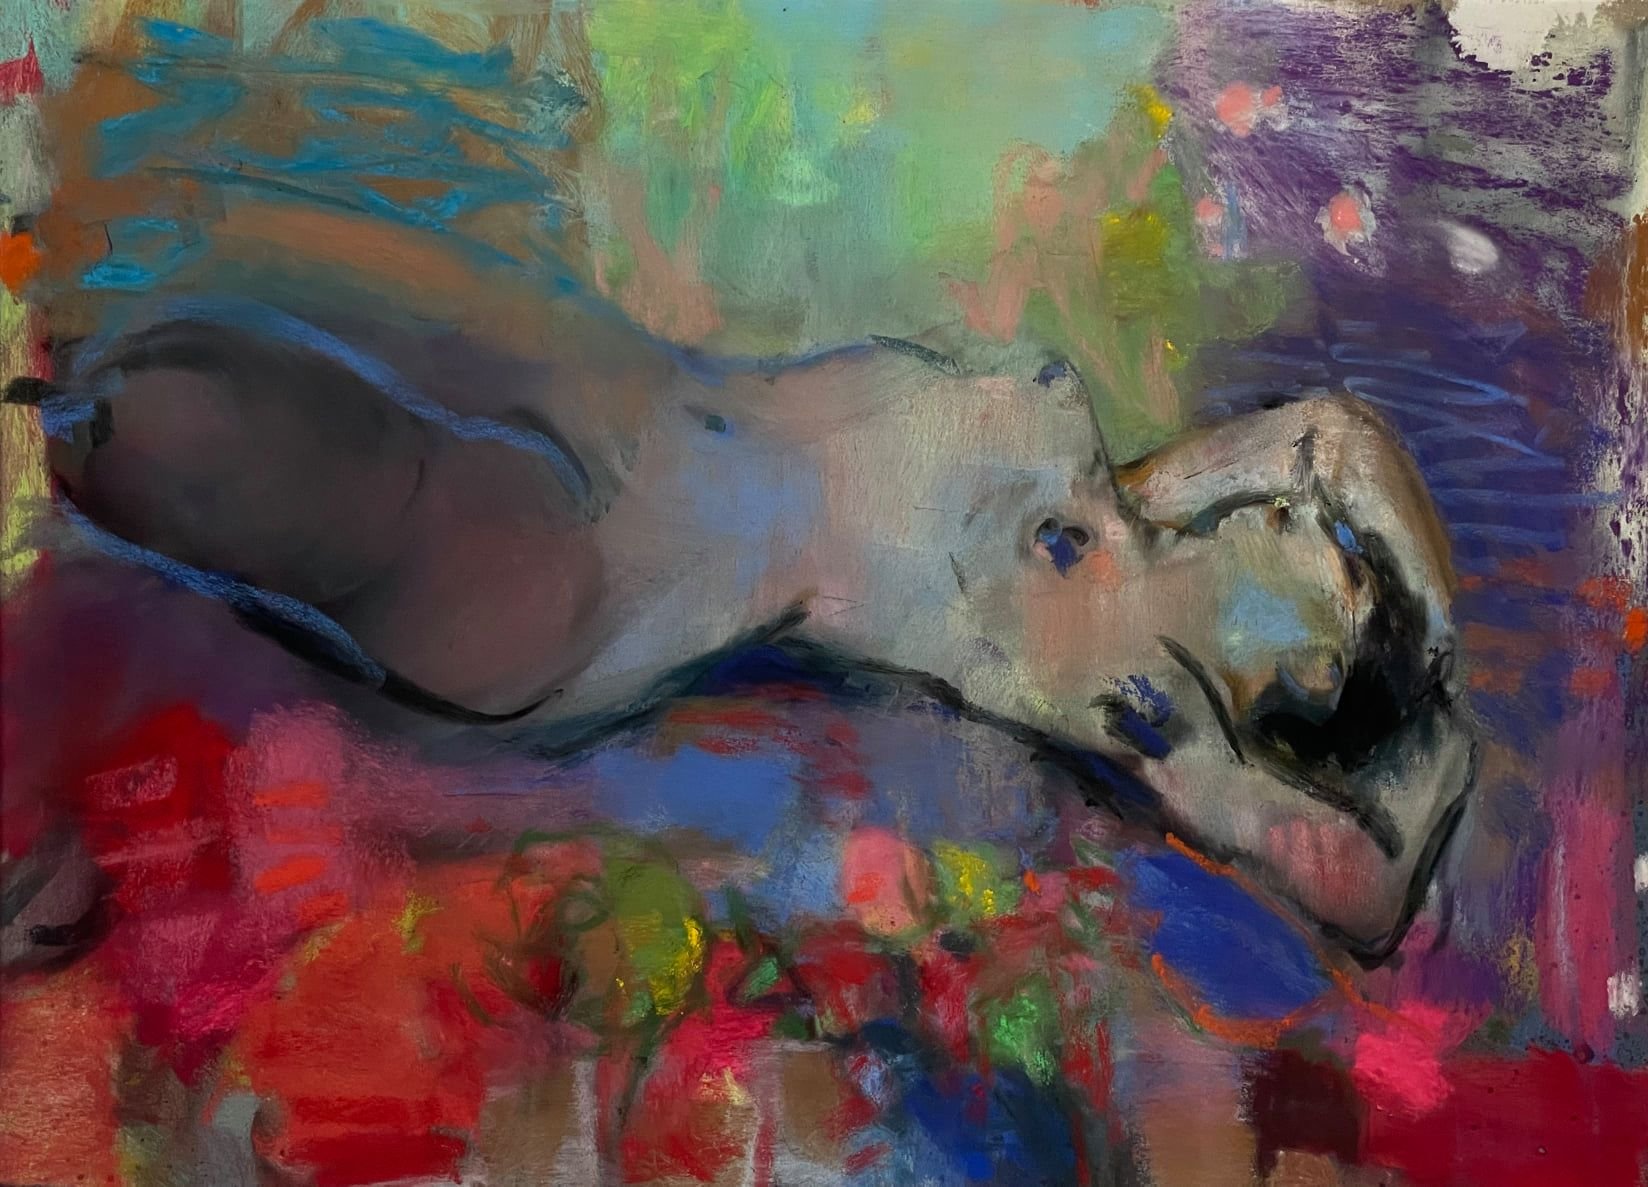 Ultramarine blue - Casey Klahn, "Dream of the Blue Nude," 2021, pastel, vine charcoal, spray acrylic varnish, dry ground on La Carte paper, 13 1/2 x 19 in. From a life model sketch.